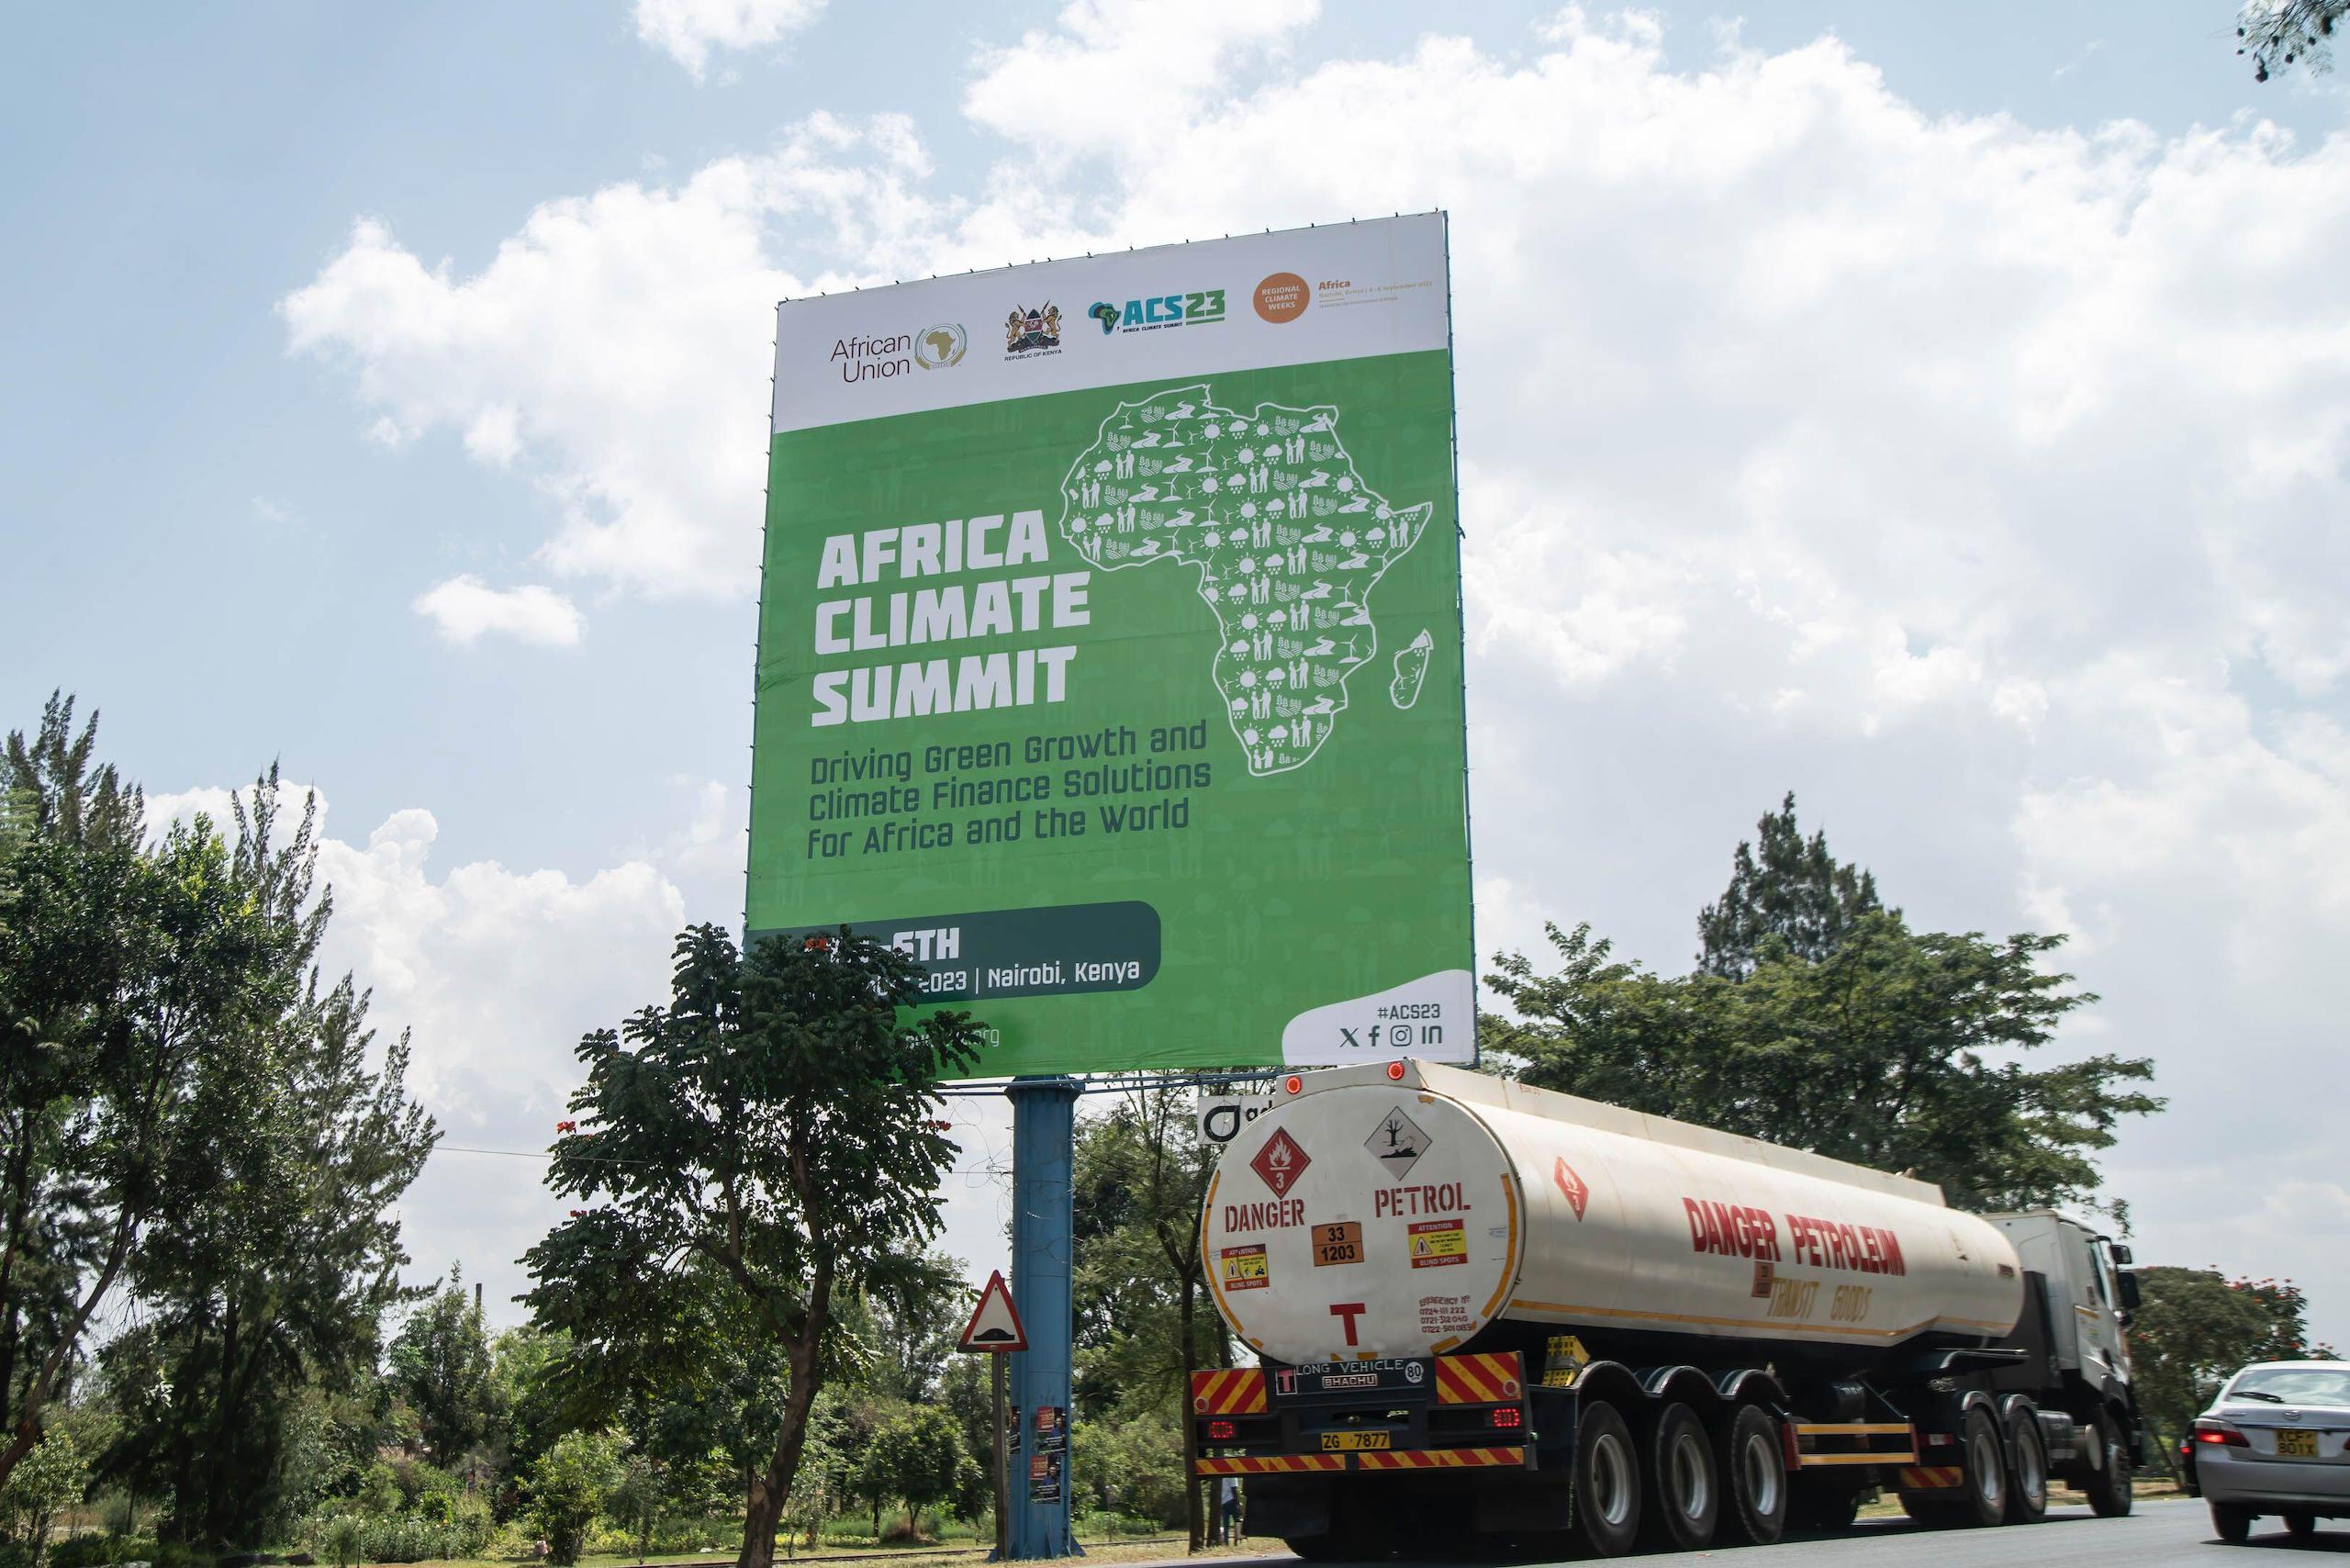 An oil tanker truck drives past a sign advertising the Africa Climate Summit